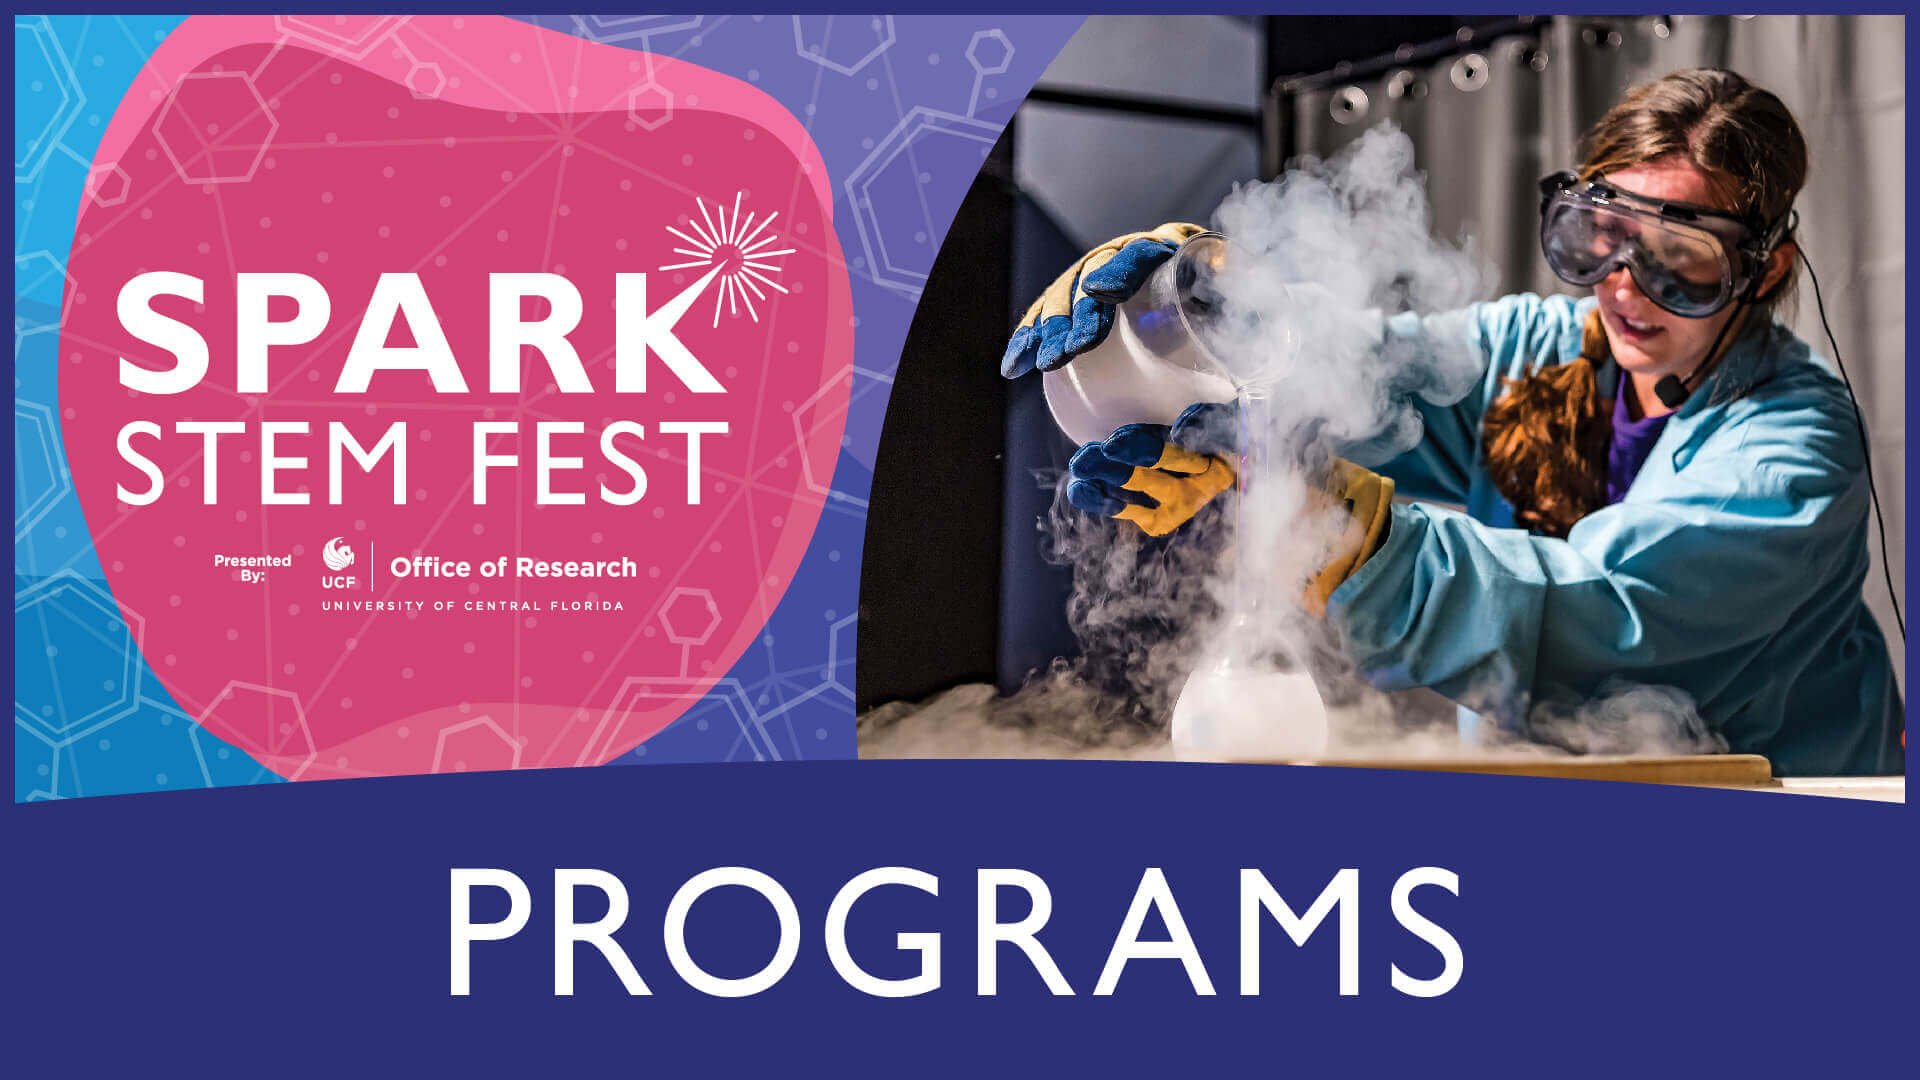 Programs: Spark STEM Fest – Presented by UCF, Office of Research